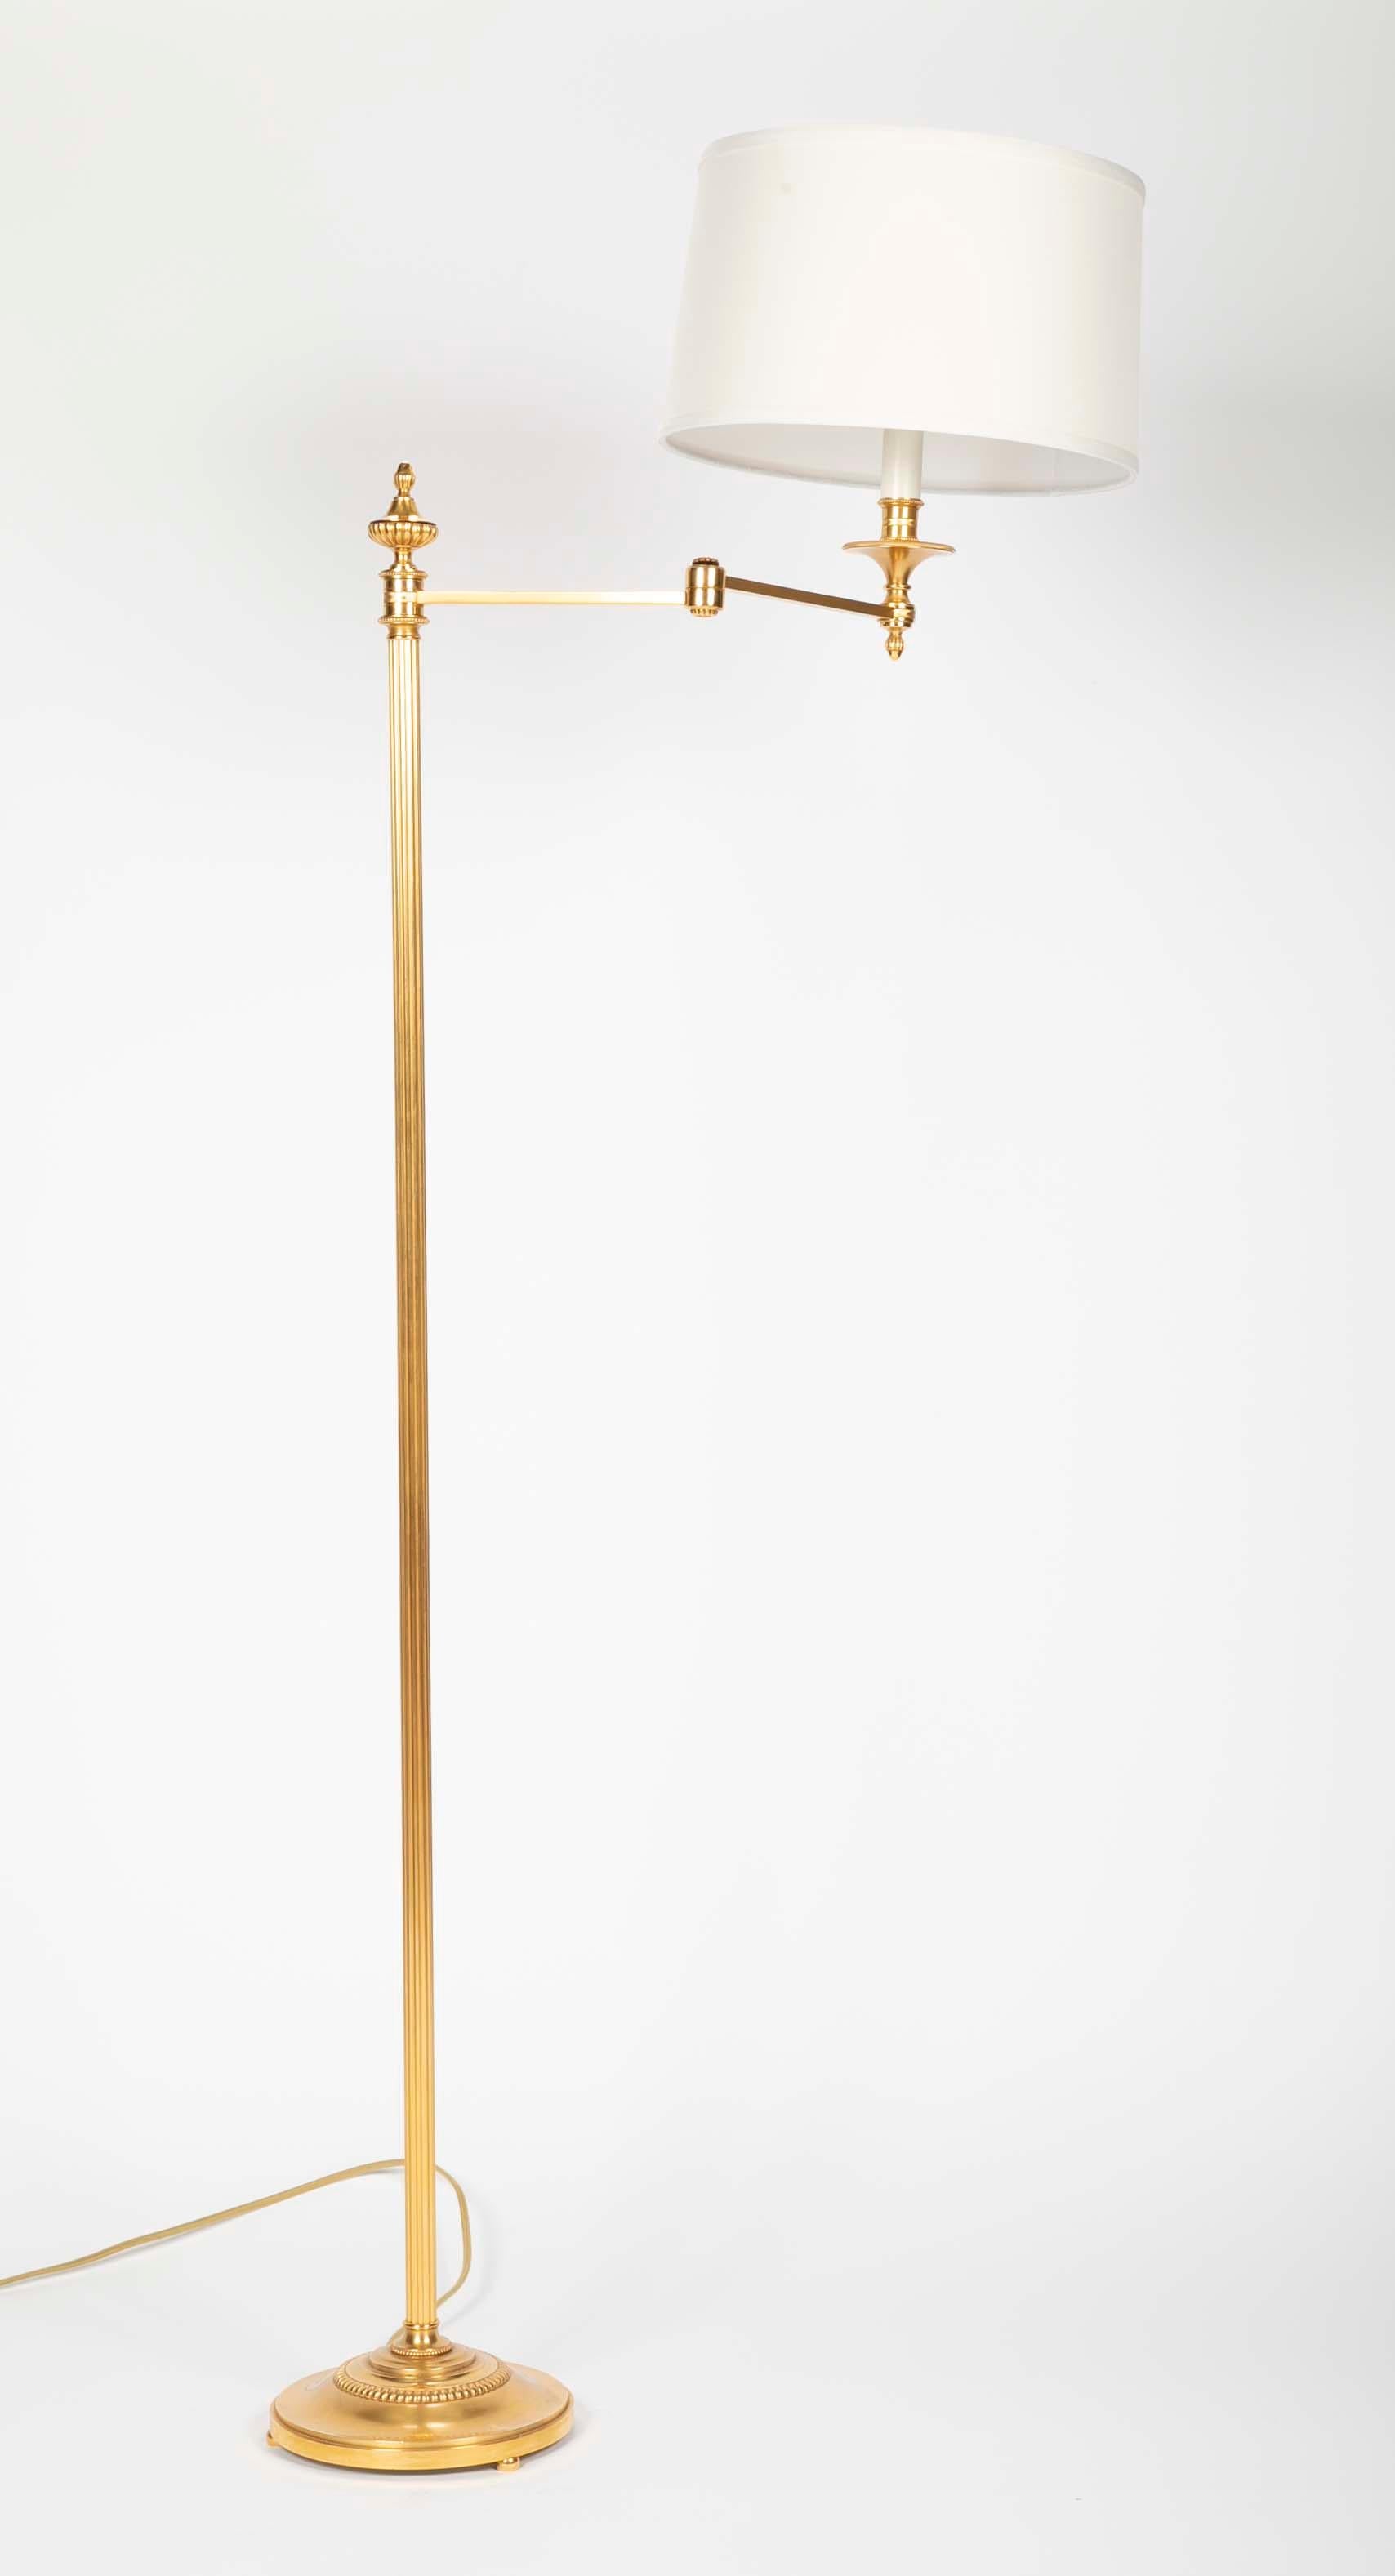 A pair of gilt bronze, swing-arm floor lamps by Maison Meilleur, France. Two pairs available.